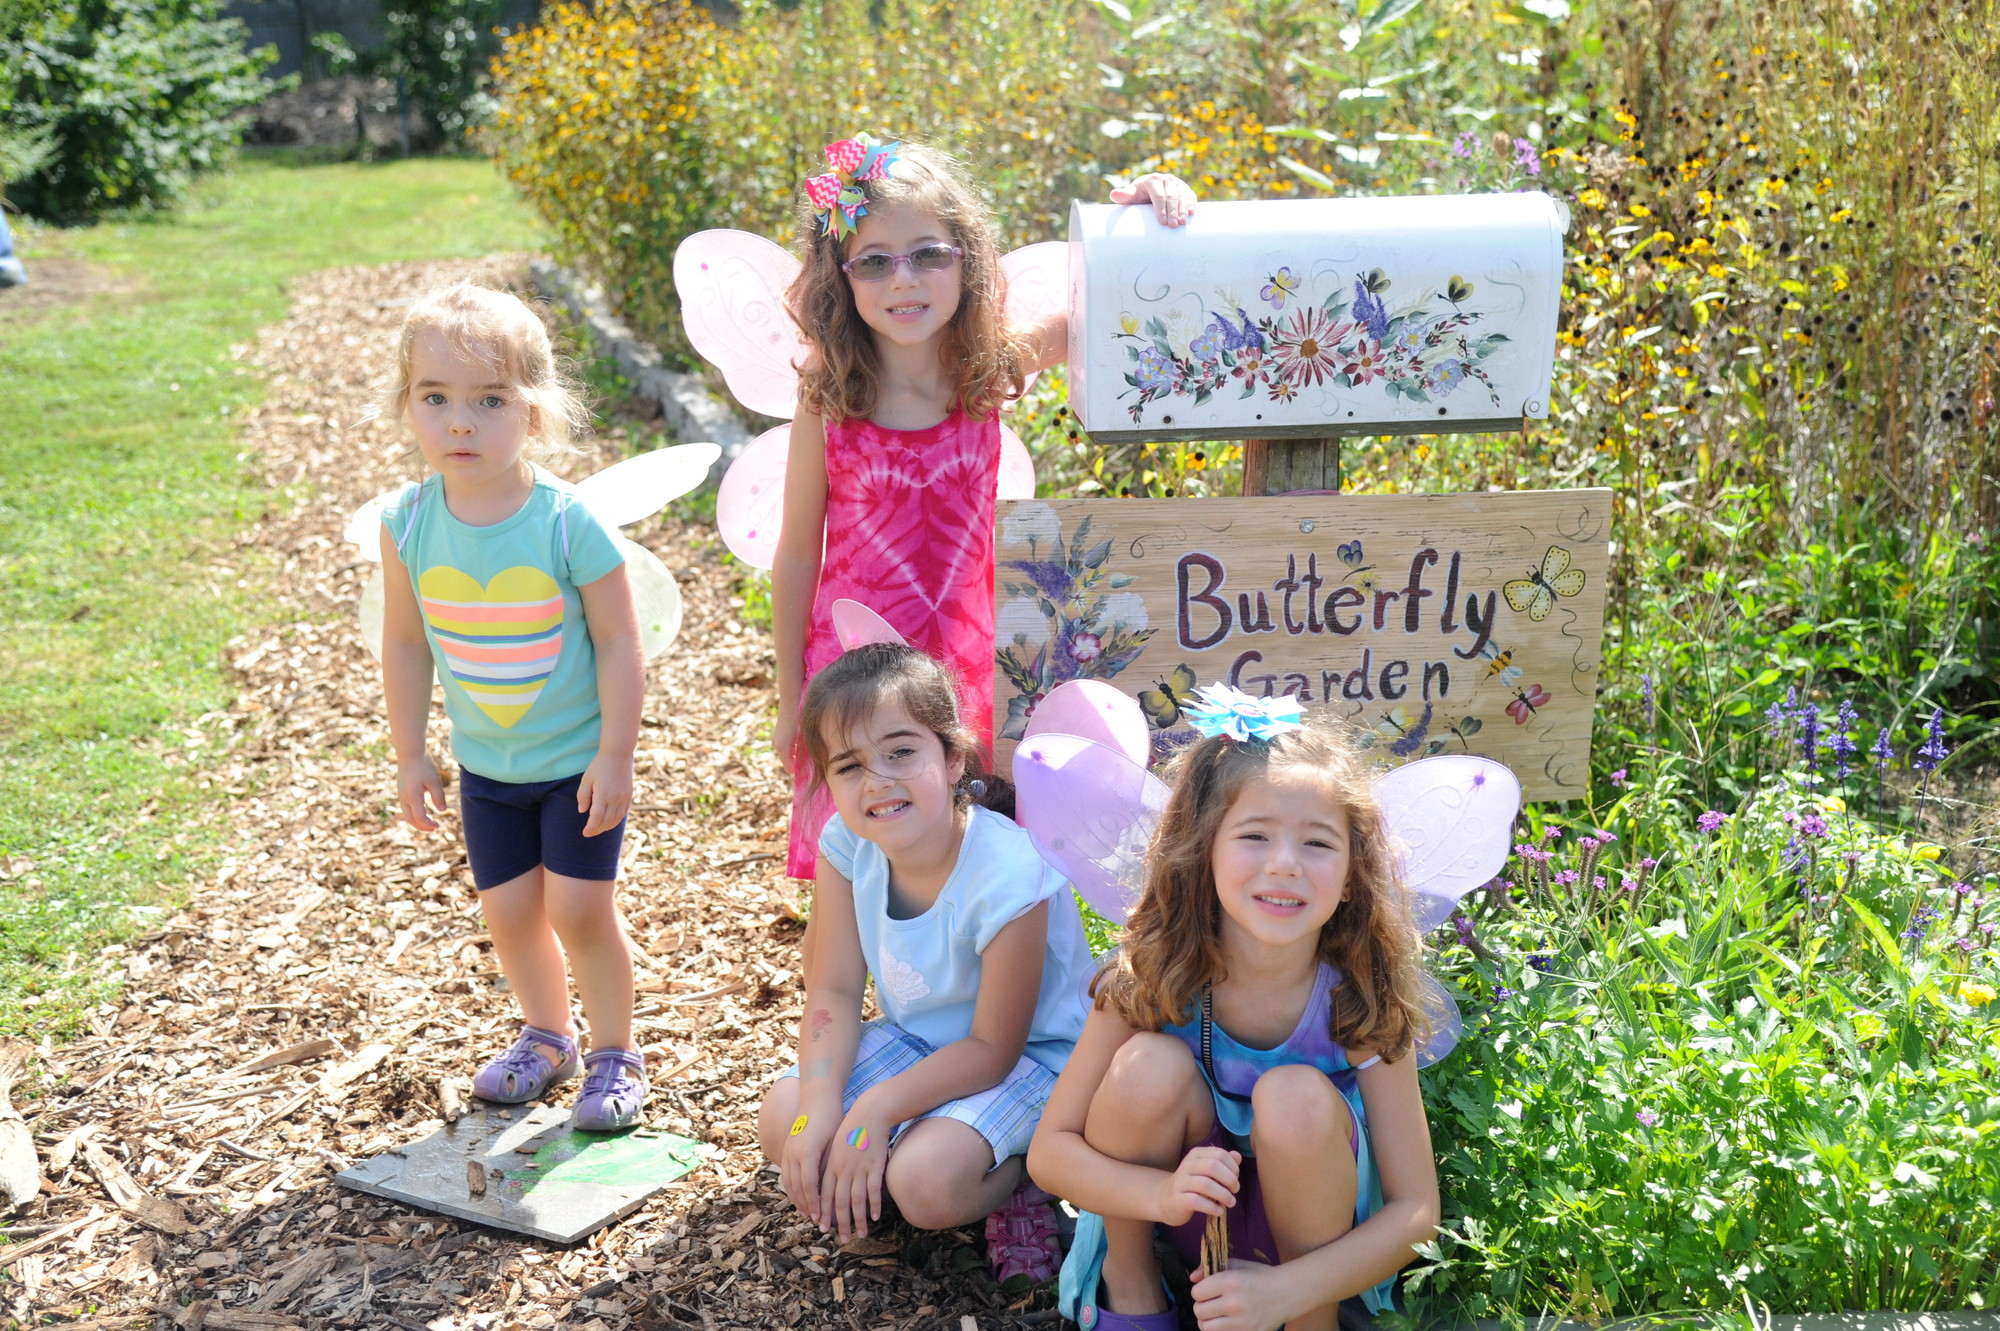 Adorned in butterfly wings were cousins Mia Saputo, 3, Lilly Turner, 6,  Rylie Sena, 5, and Sophie Turner, 6, all of North Merrick, next to the farm’s butterfly garden.